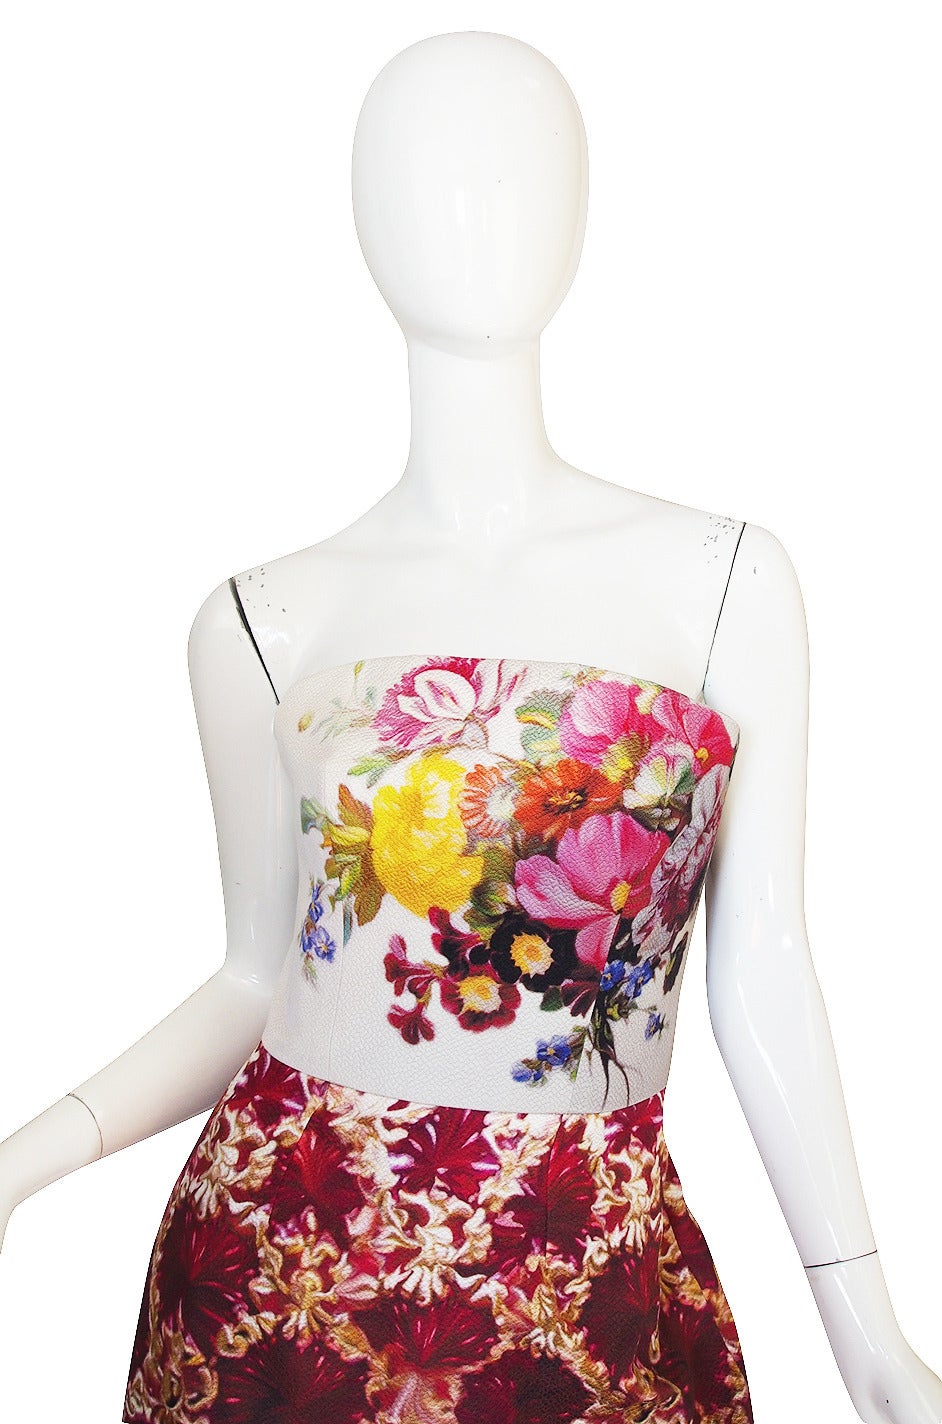 Fall 2011 Mary Katranzou Strapless Print Dress In Excellent Condition For Sale In Rockwood, ON